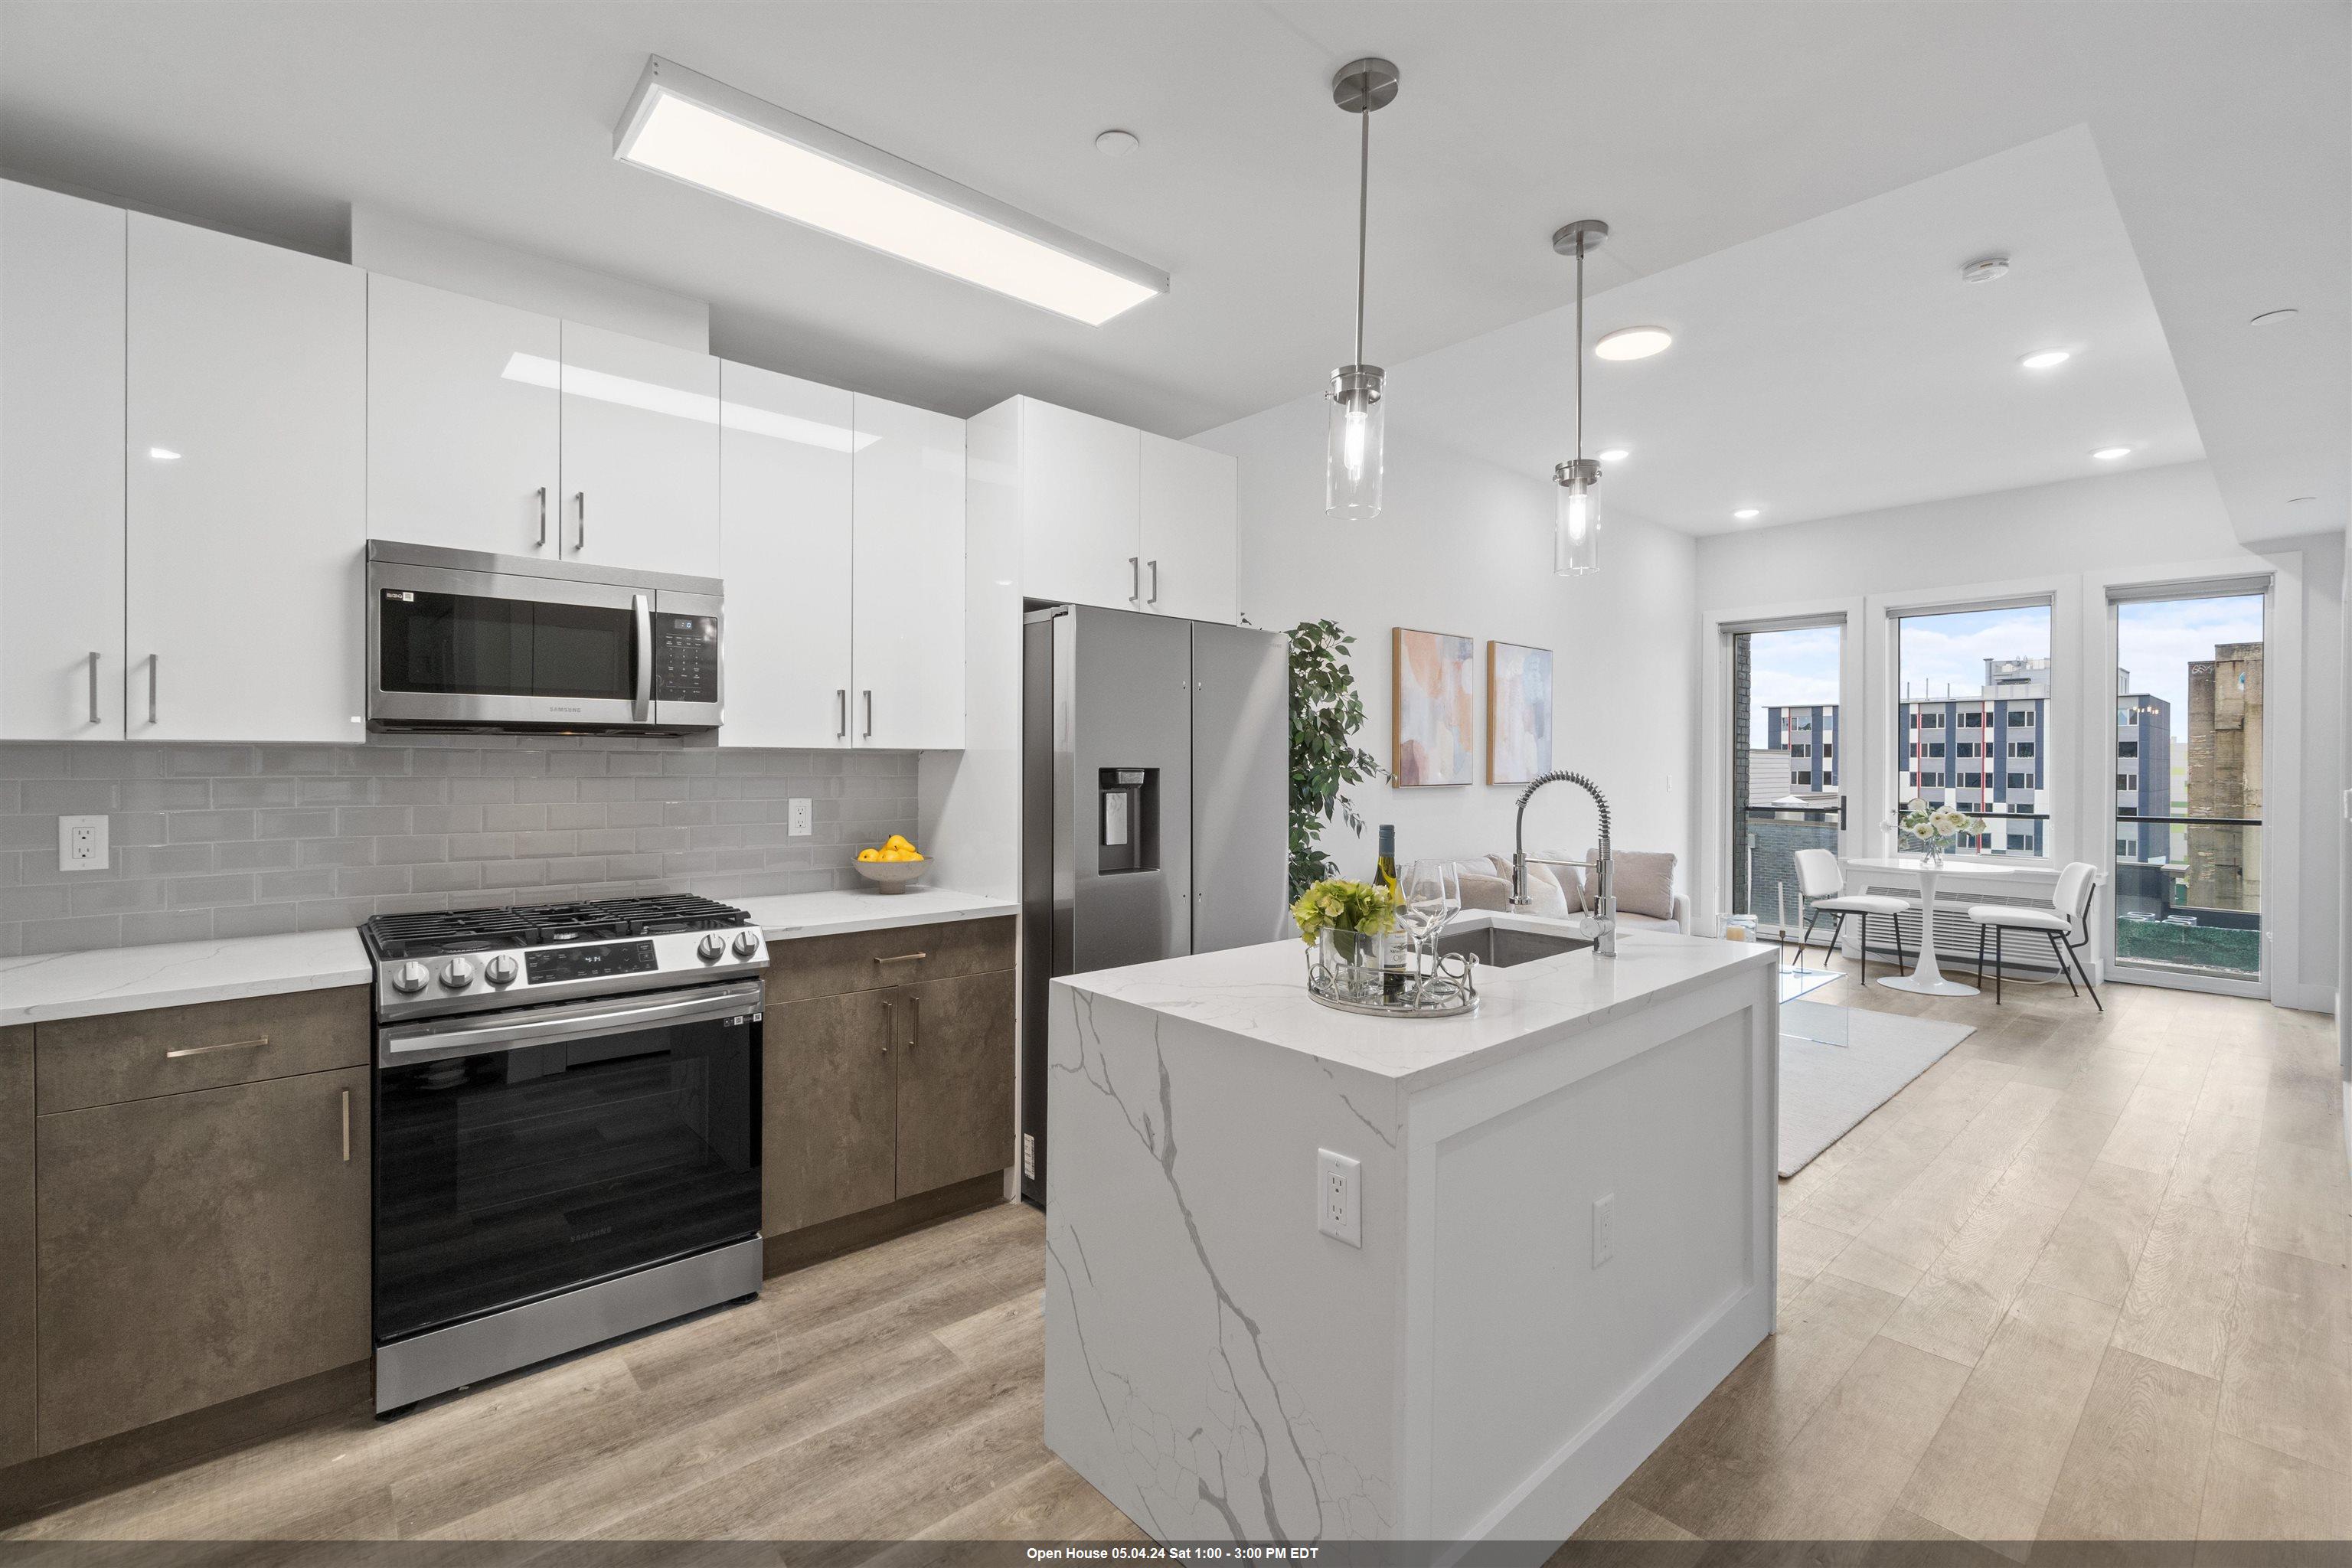 a kitchen with stainless steel appliances kitchen island granite countertop a stove a refrigerator a sink a stove and white cabinets with wooden floor